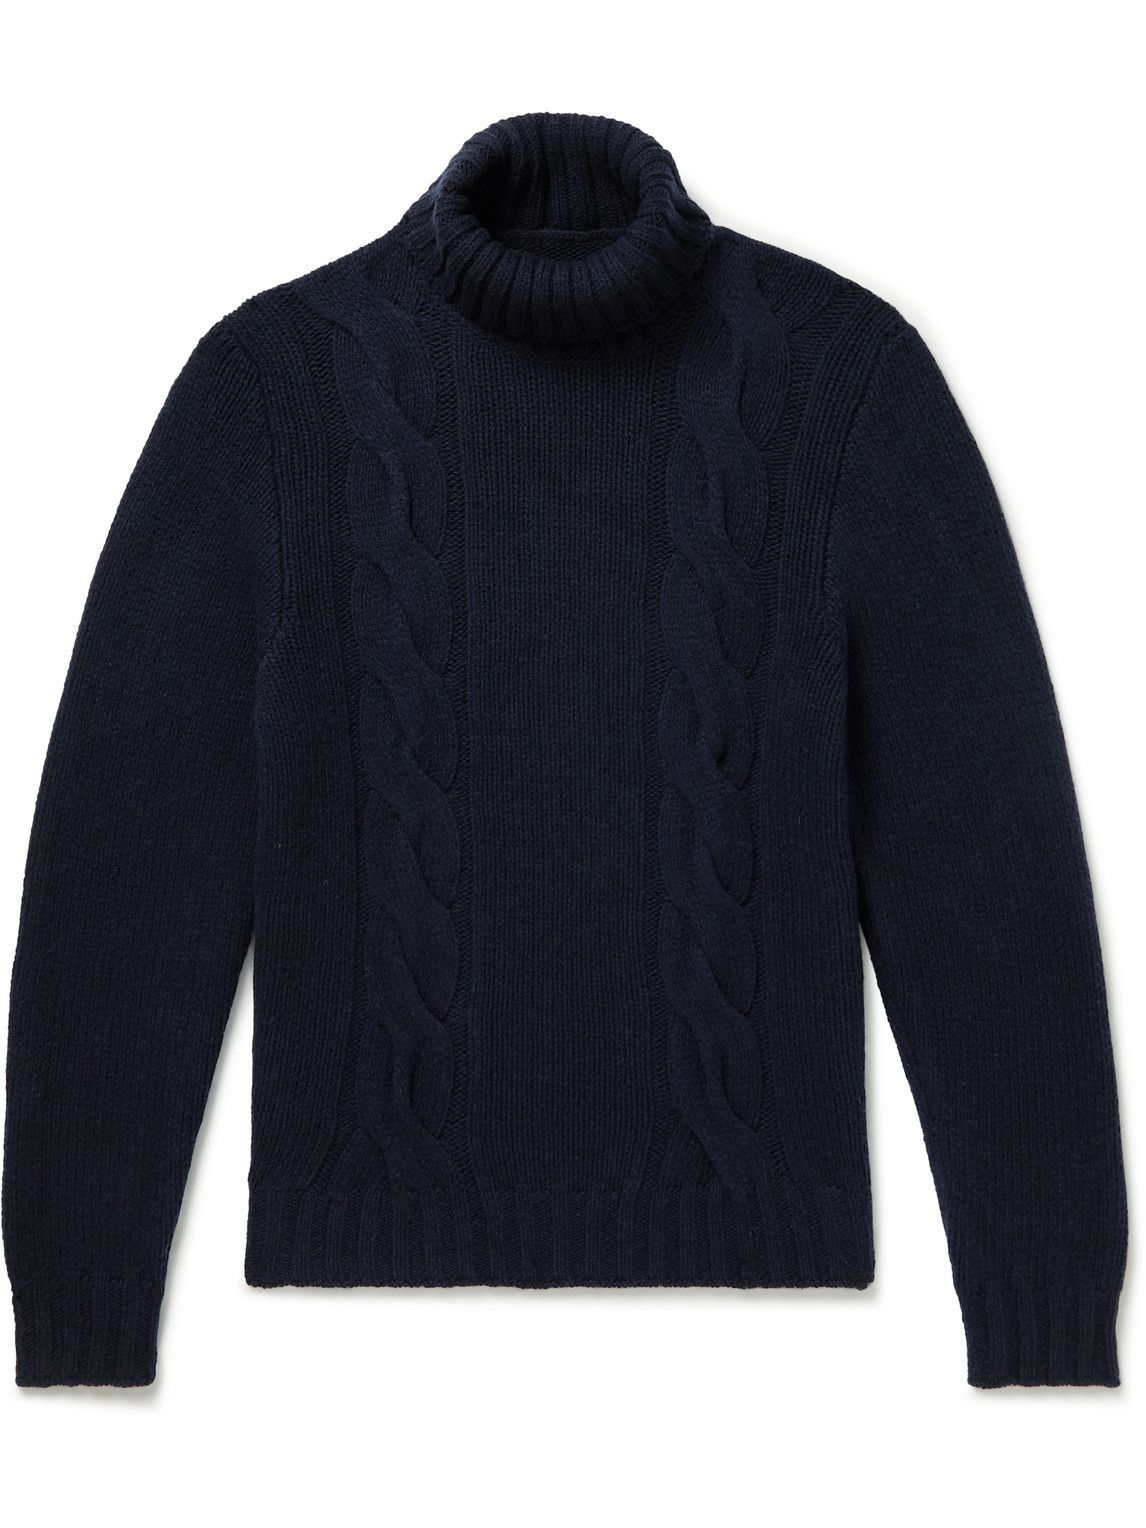 Anderson & Sheppard - Slim-Fit Cable-Knit Merino Wool Rollneck Sweater ...